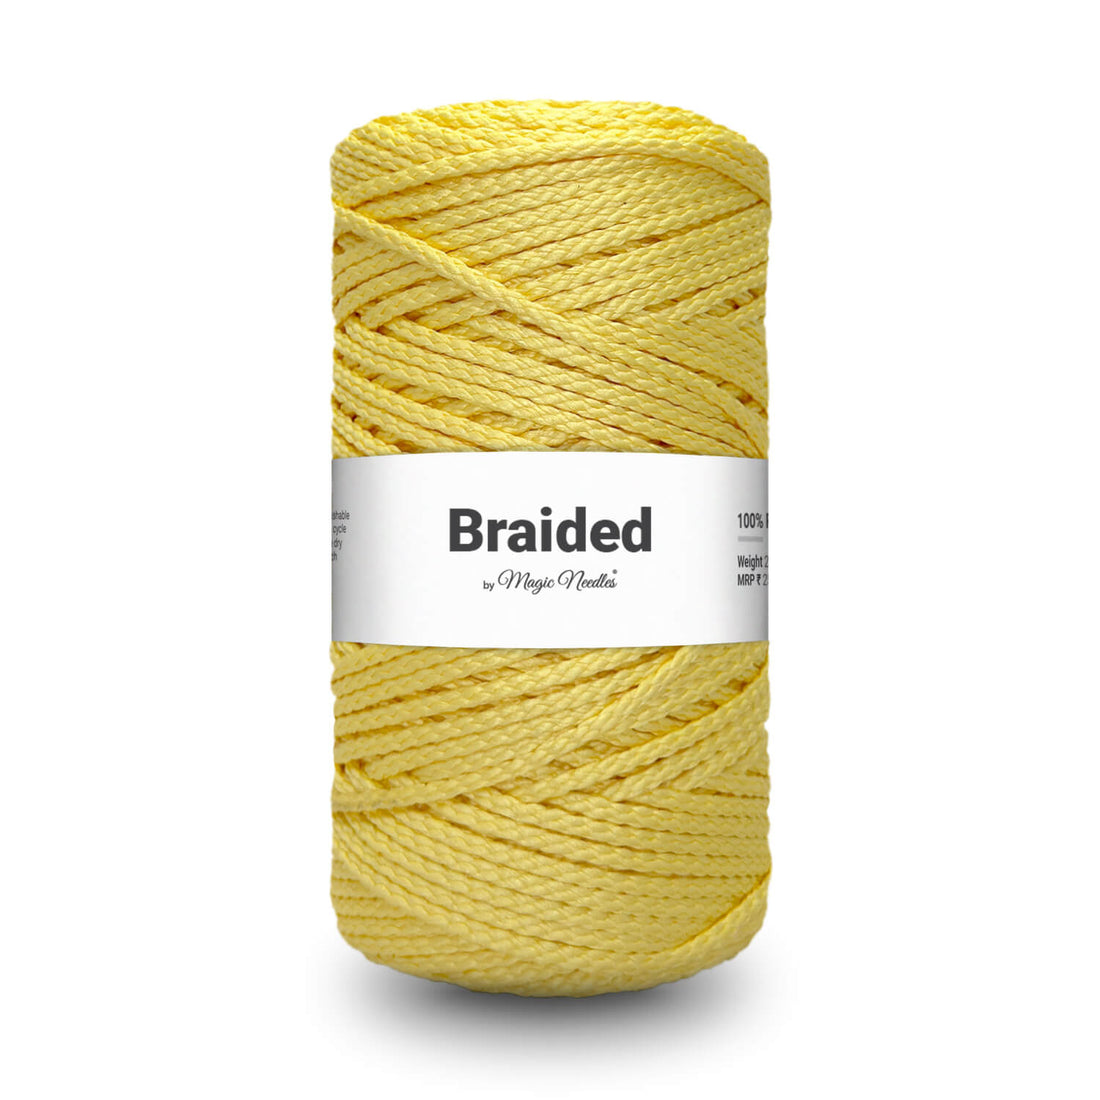 Braided Polyester Rope - Yellow - 27